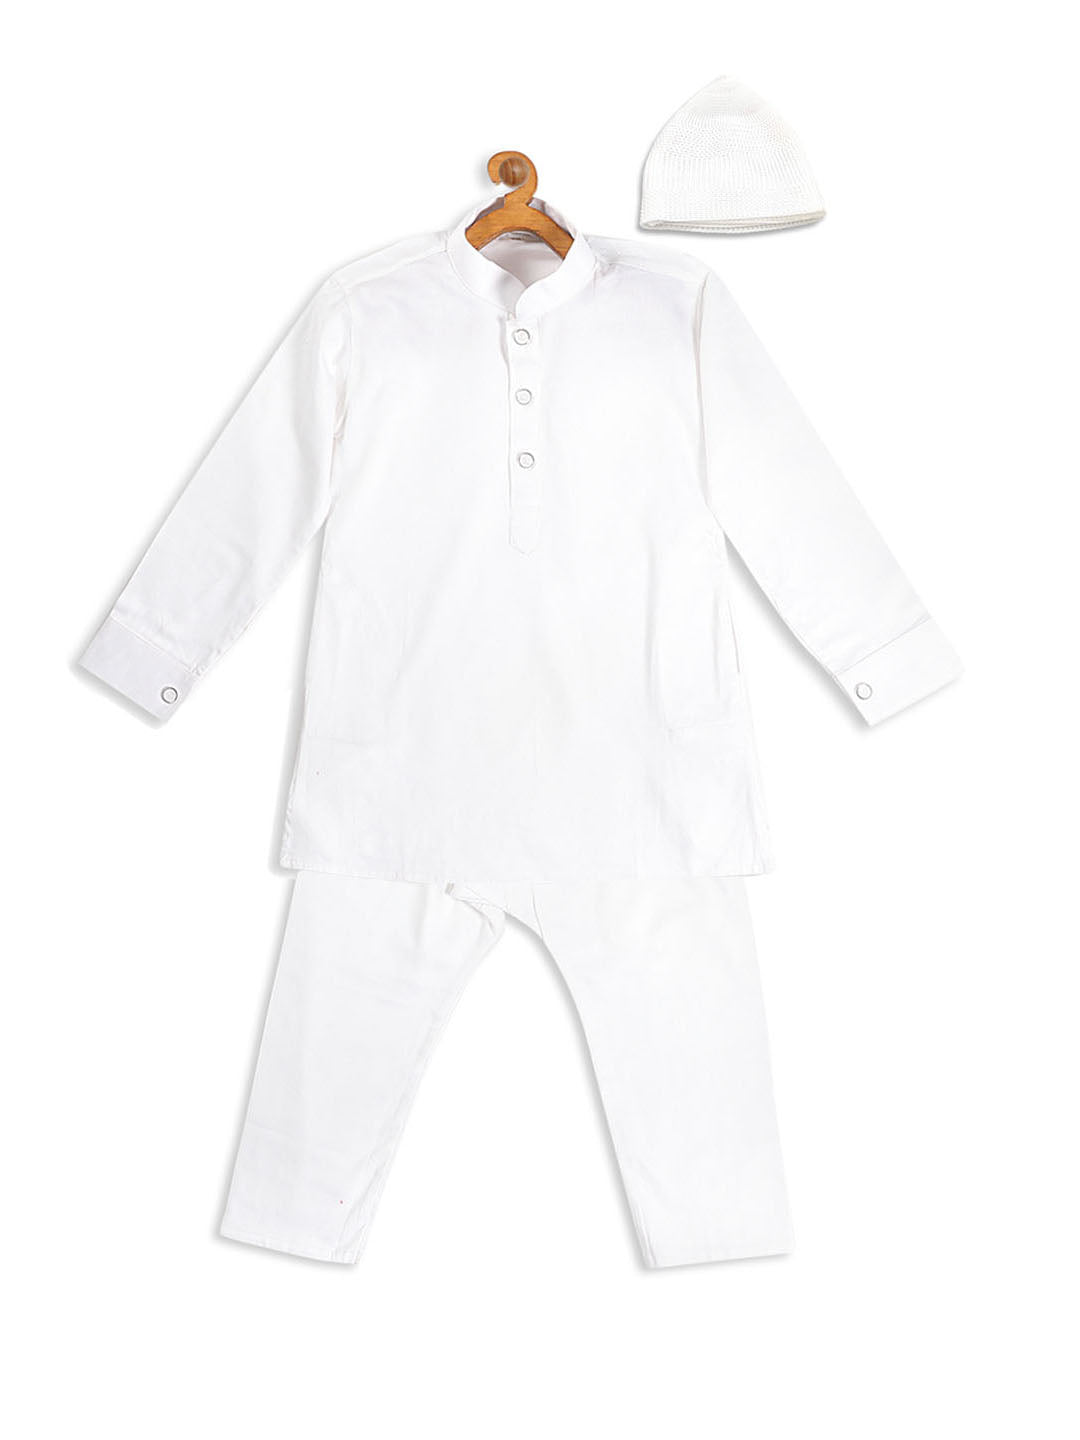 Vastramay Soft Shiny Cotton Kurta With A Buttoned Cuff Styling Paired With A Churidar Pyjama Set for Boys - Distacart